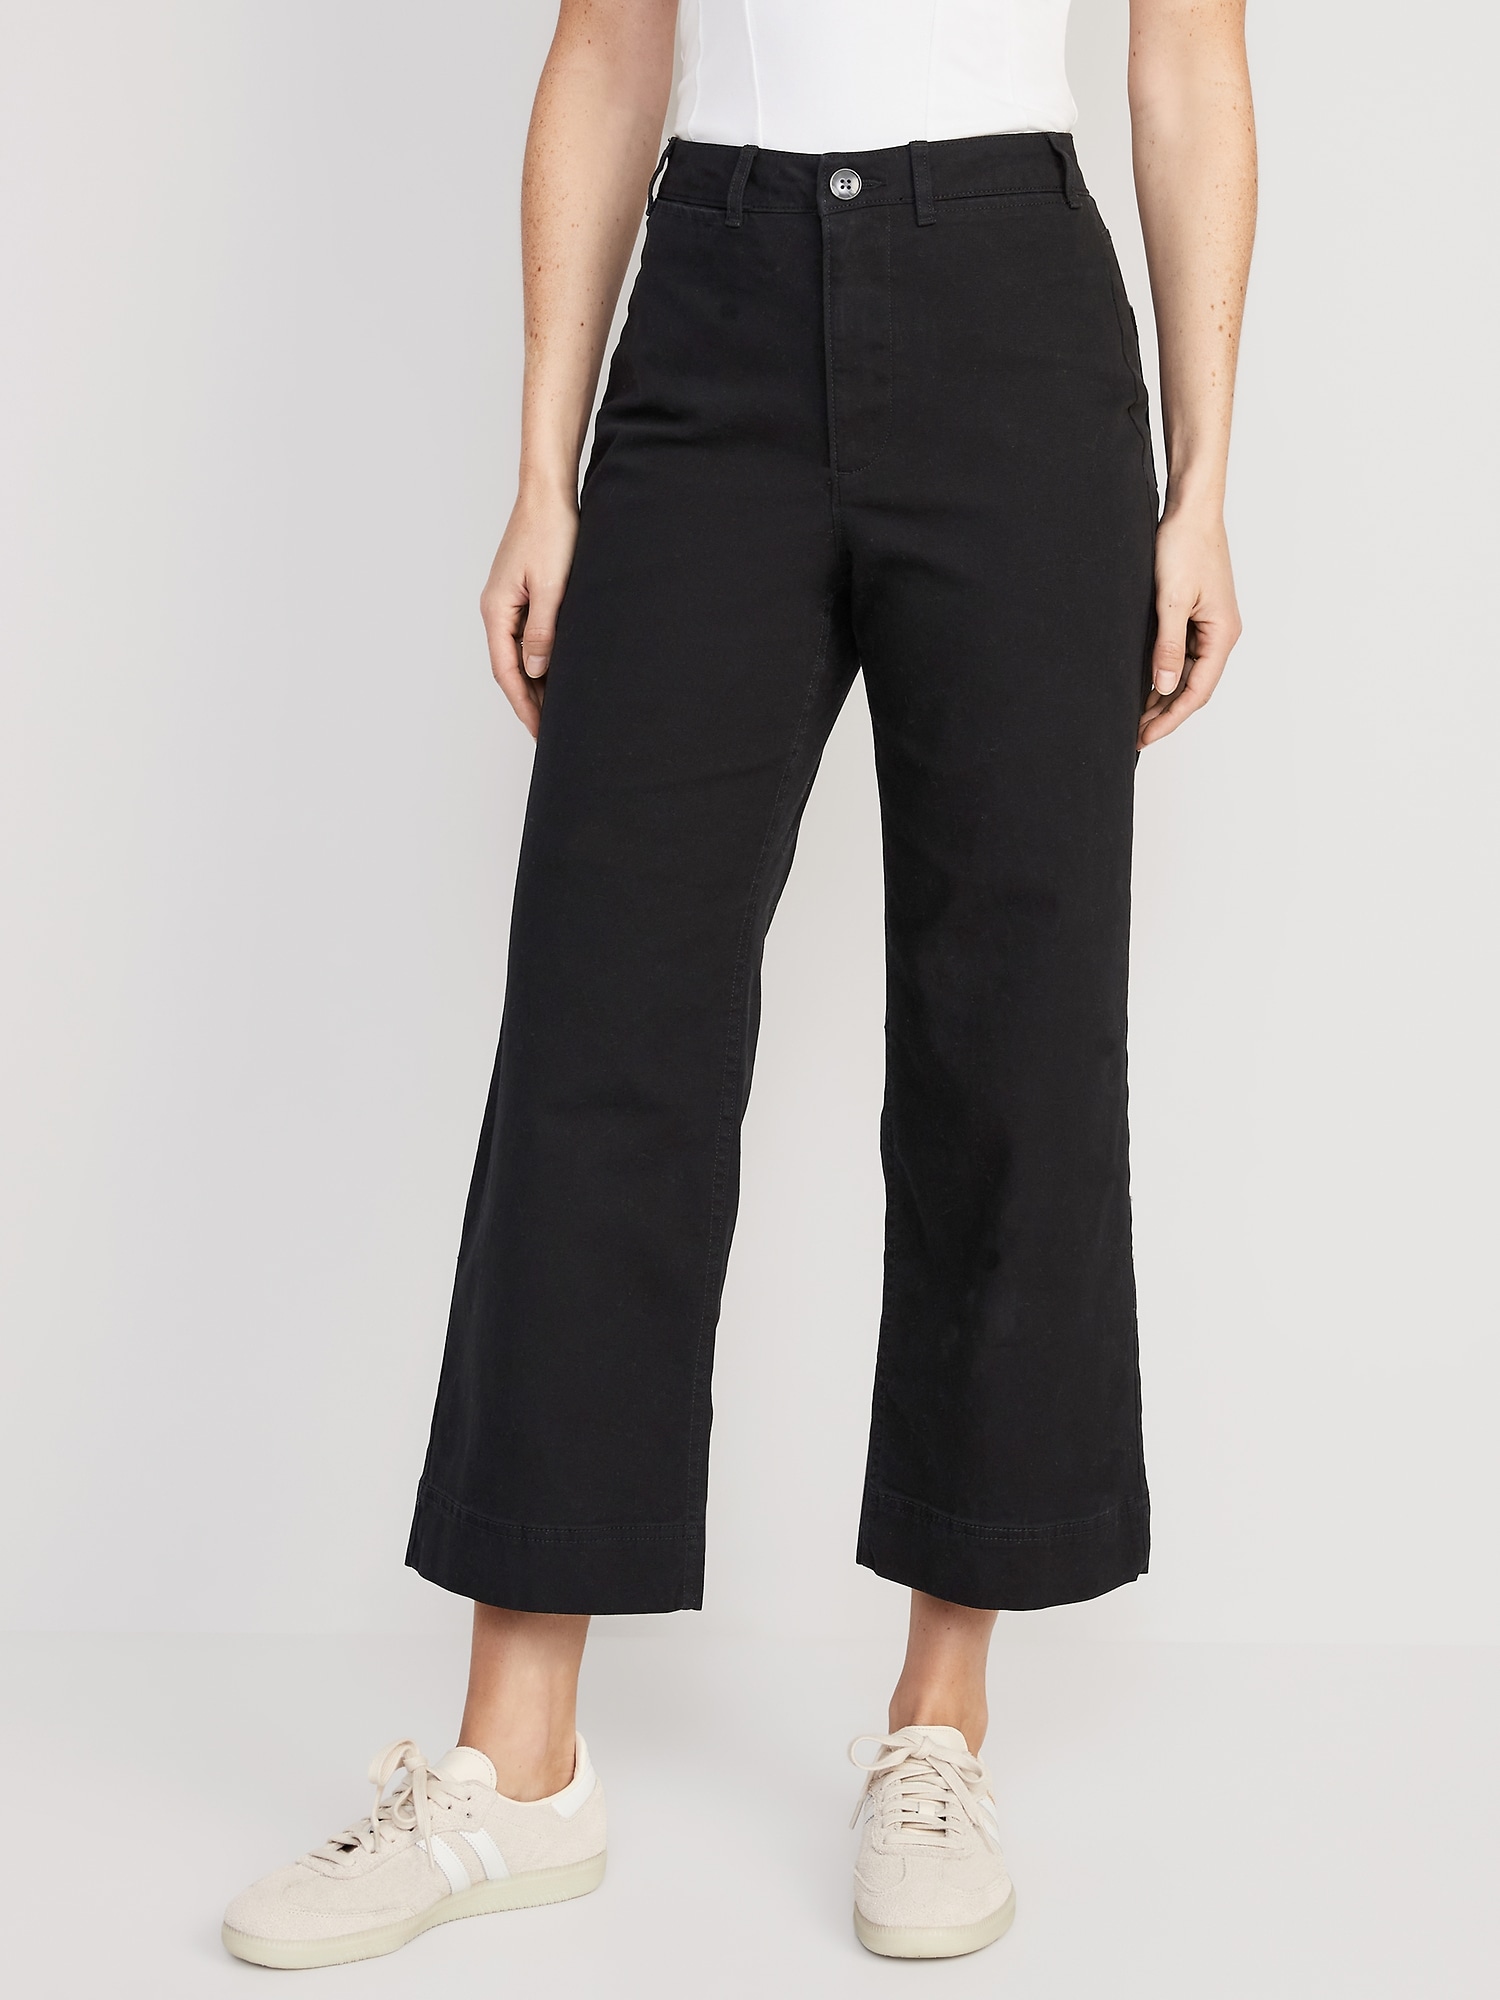 Cropped Pants For Tall Women